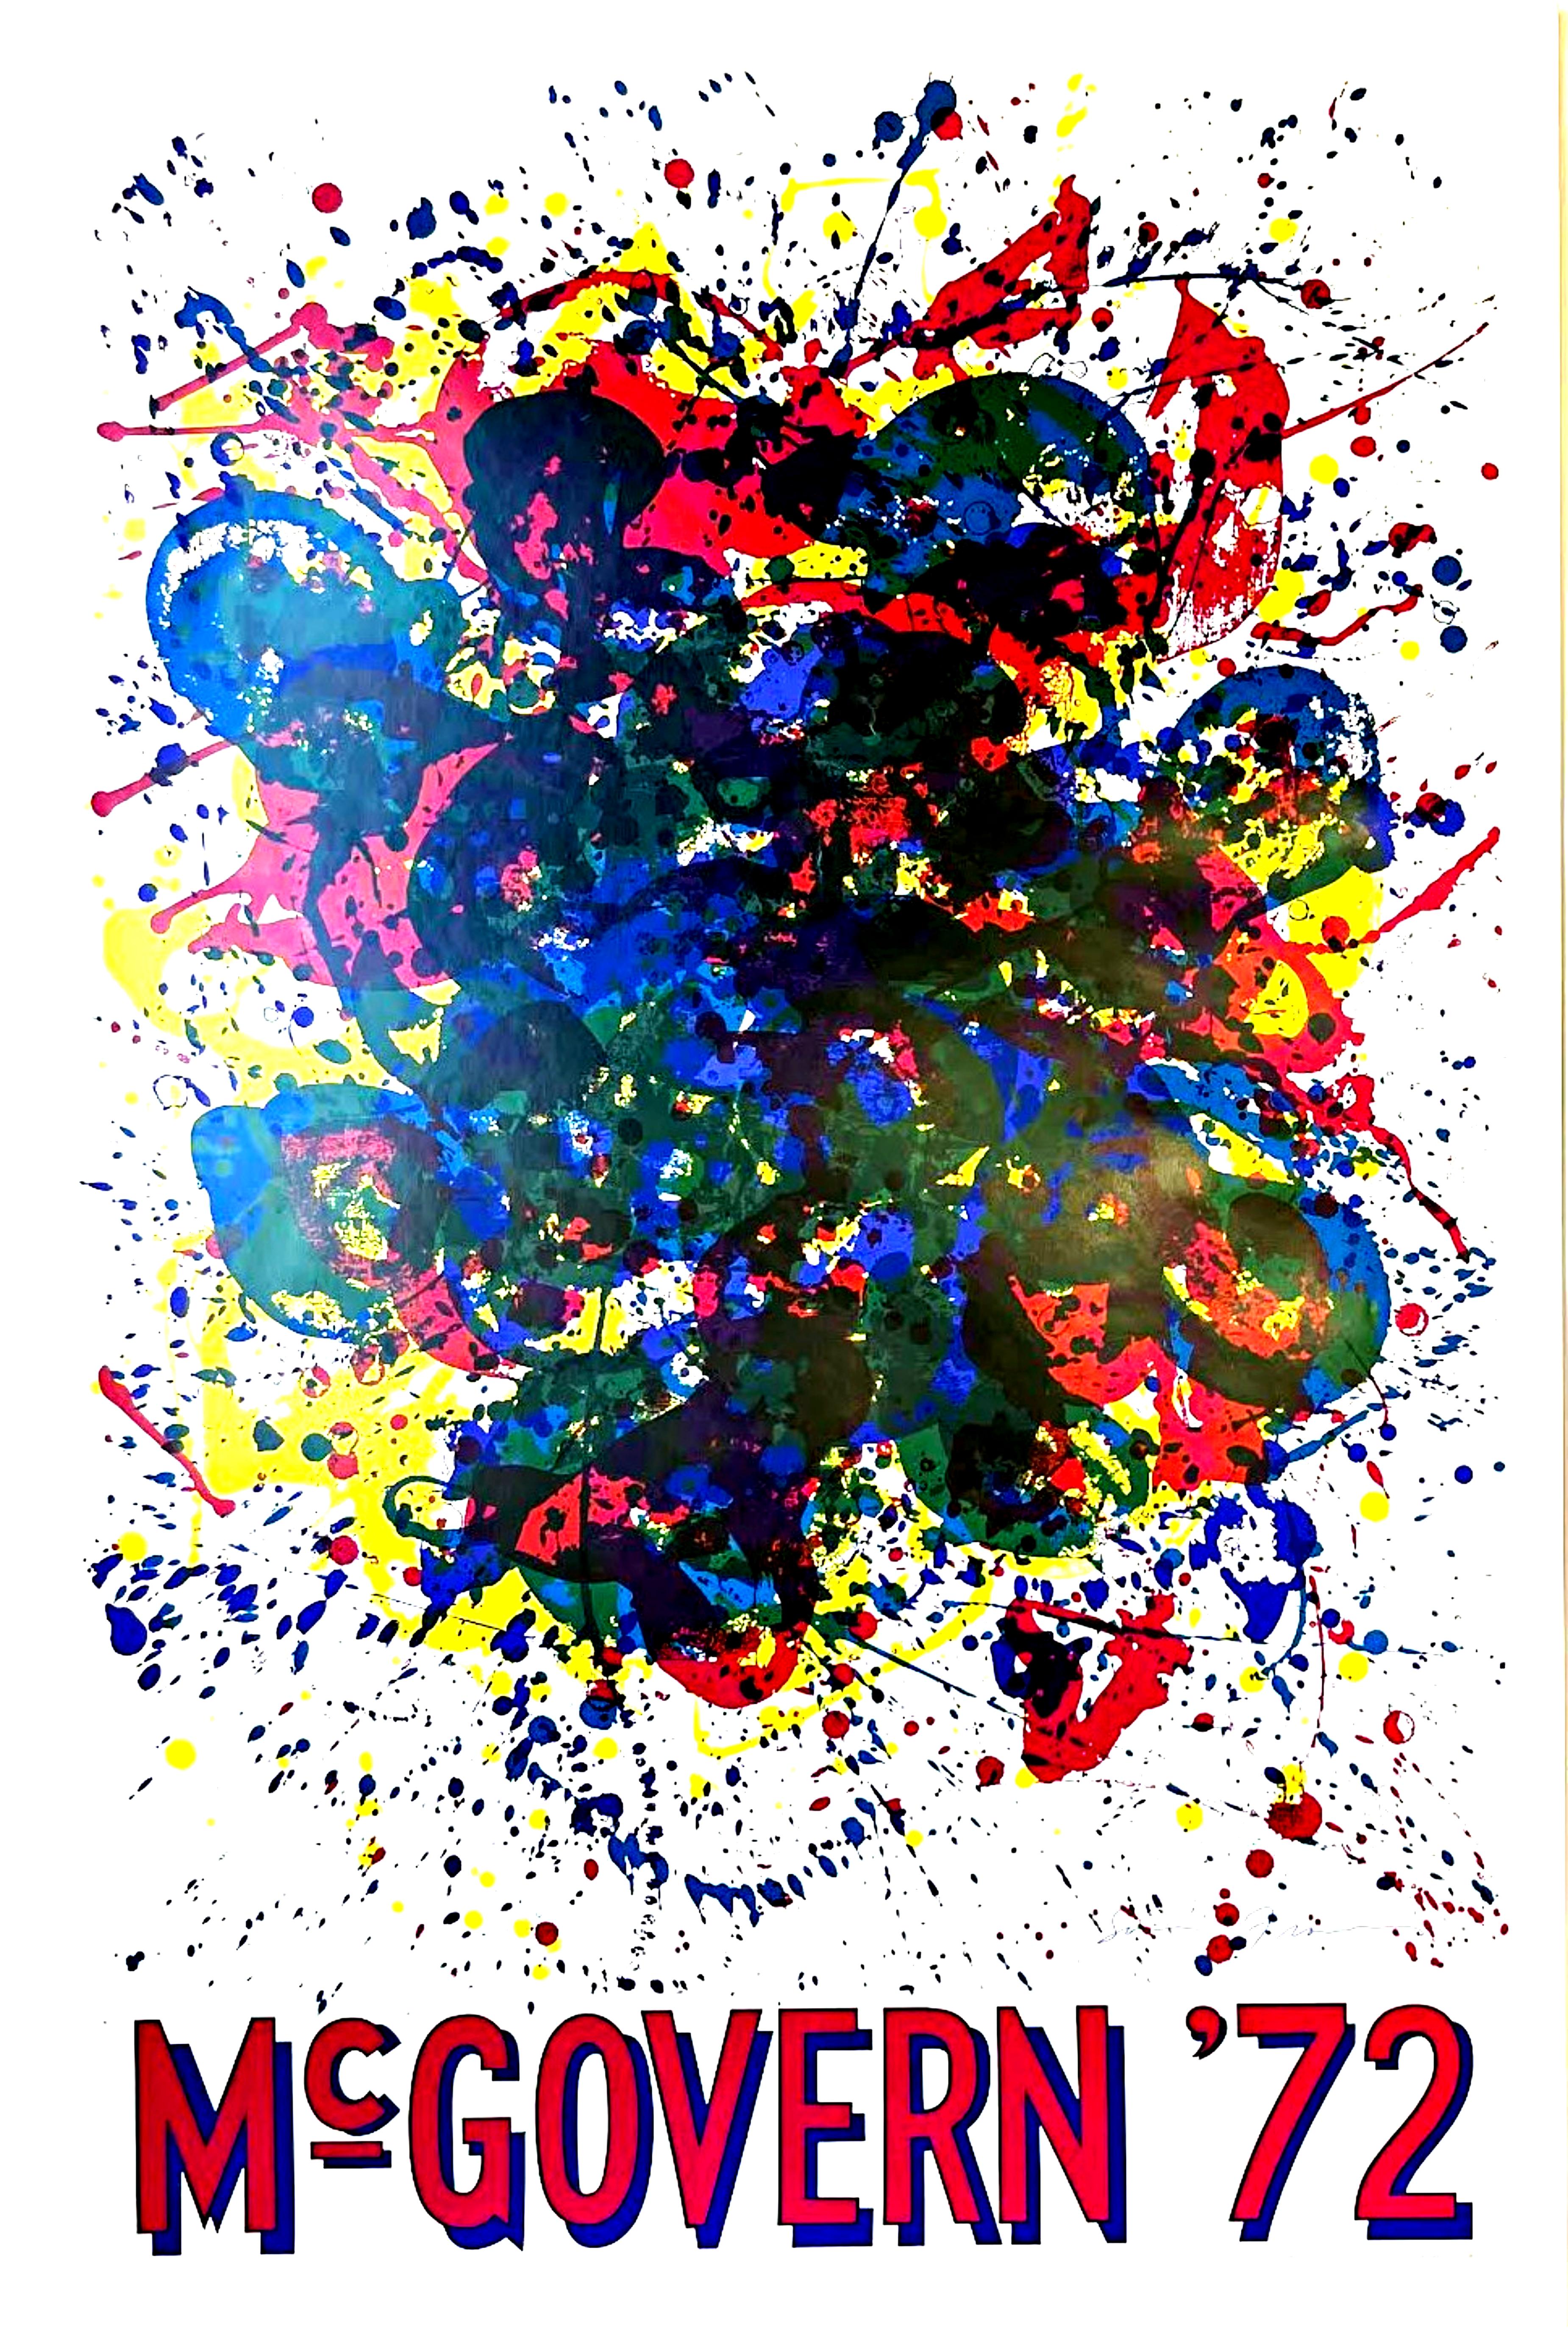 Sam Francis McGovern '72 Poster (Hand signed by Sam Francis), 1972
Photo offset poster (hand signed by Sam Francis)
Signed in blue ink on the front by Sam Francis with Sam Francis copyright 1972
38 × 25 inches
Unframed
Signed in blue ink on the